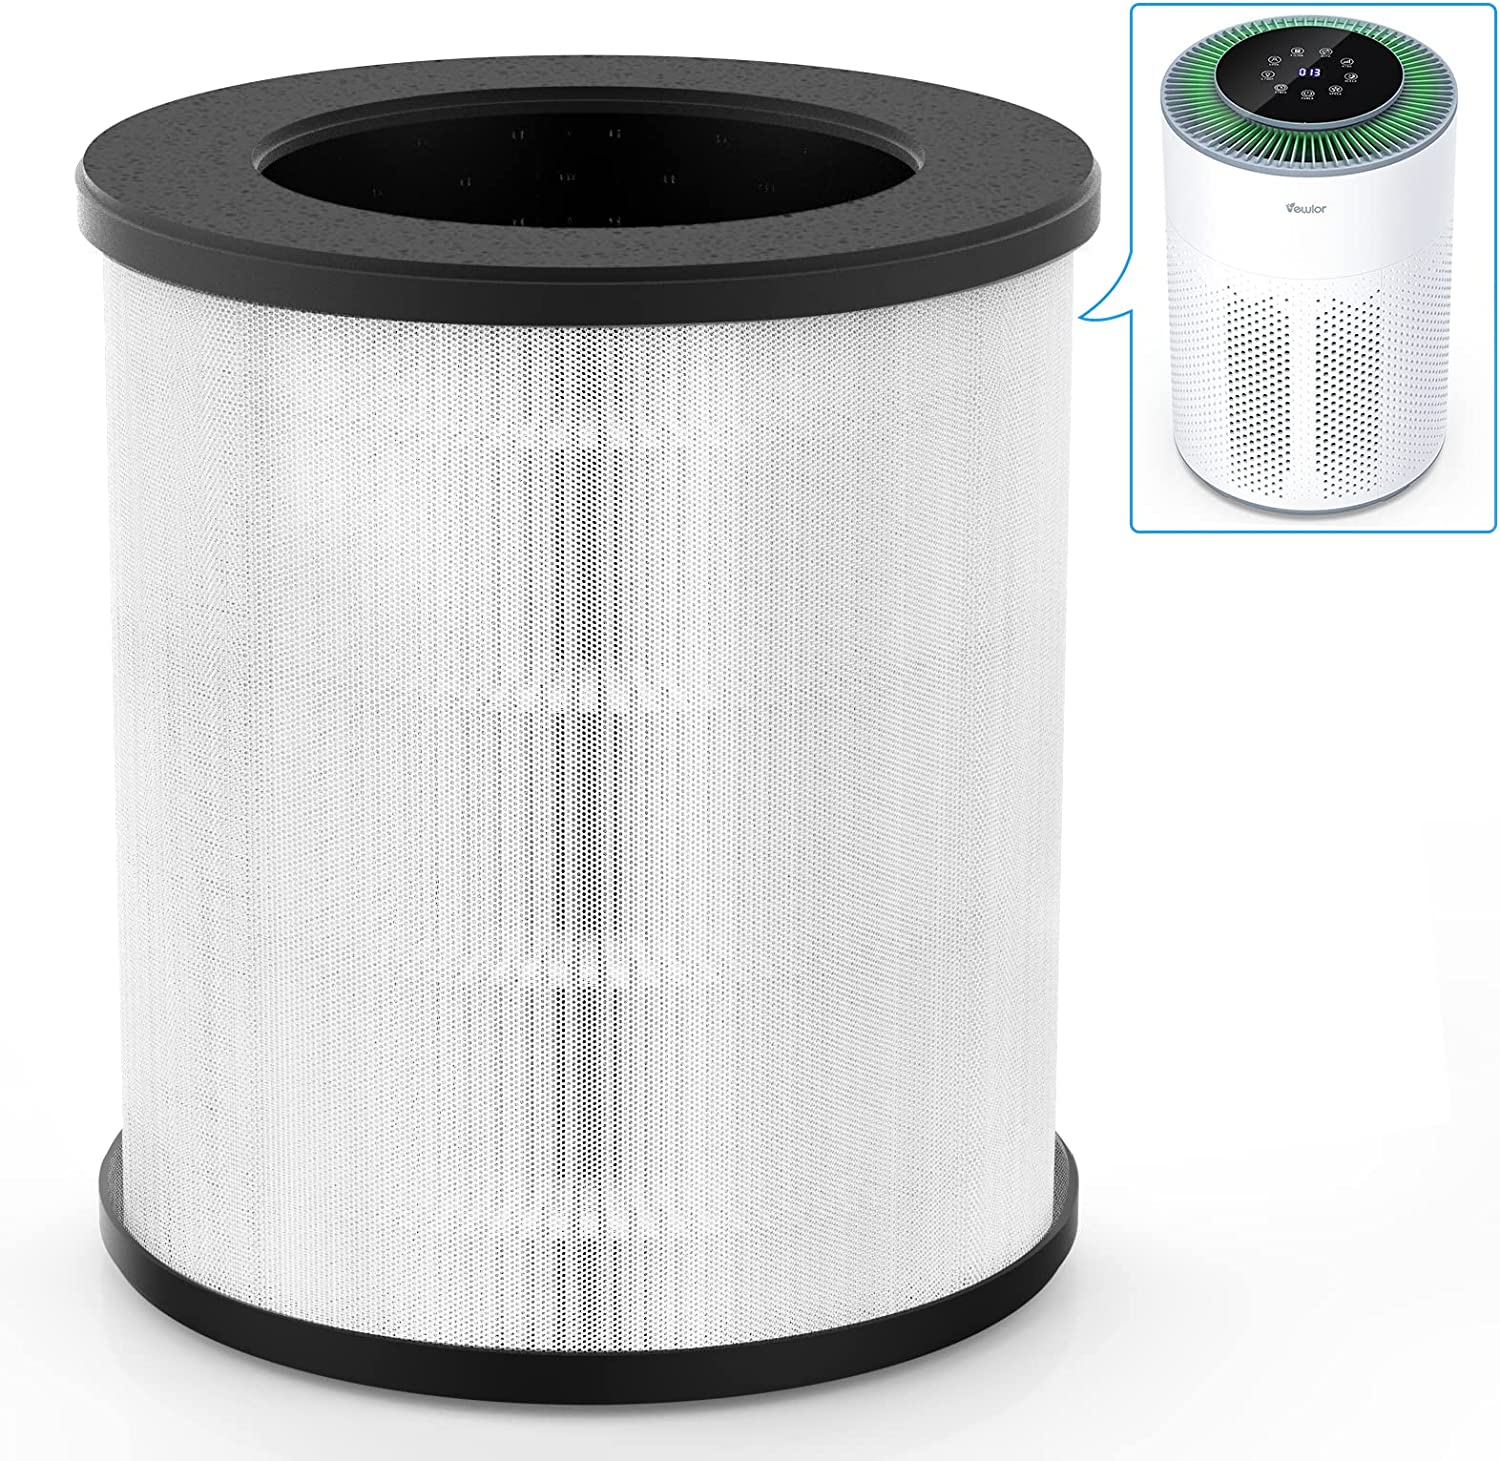 Air Purifier A2 Replacement Filter, VEWIOR H13 True HEPA Air Cleaner Filter, High-Efficiency Activated Carbon, Remove up to 99.97% of Particles Vewior